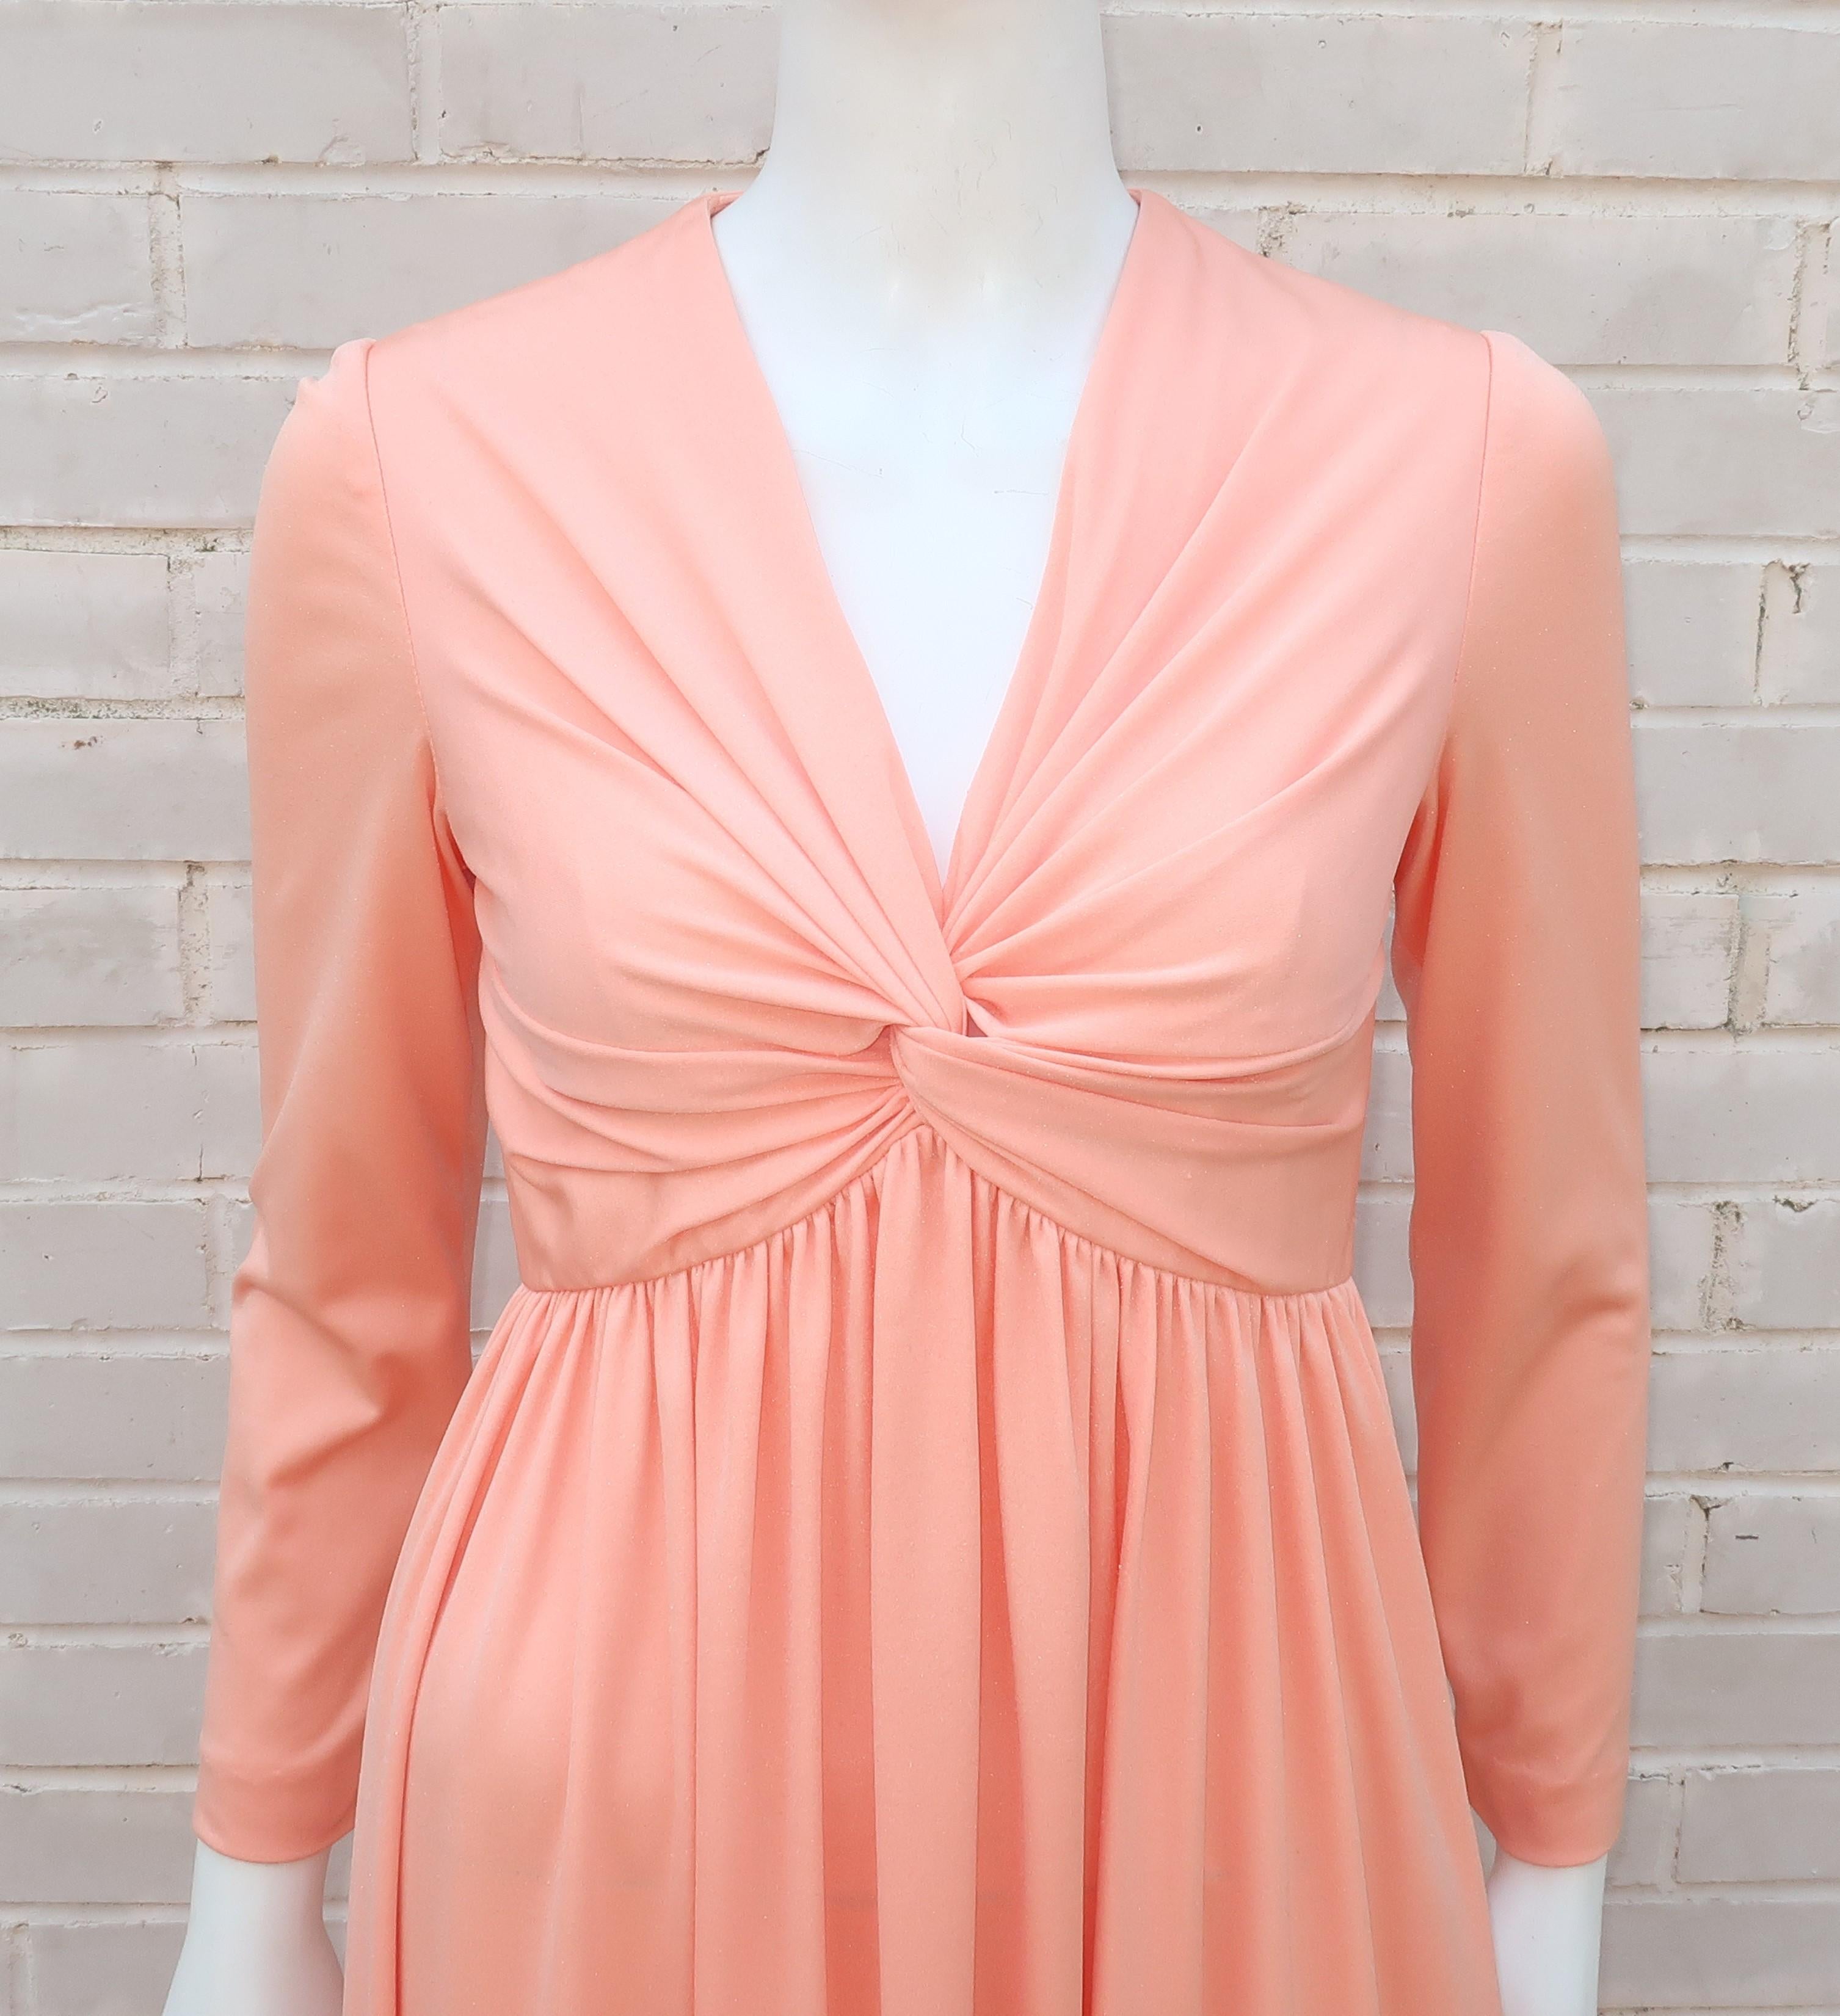 You'll lead the fashion parade when wearing this C.1970 Mardi Gras of New York jersey evening dress.  The peachy sherbet shade compliments the flattering empire waist silhouette complete with a ruched twist at the bust.  It zips and hooks at the